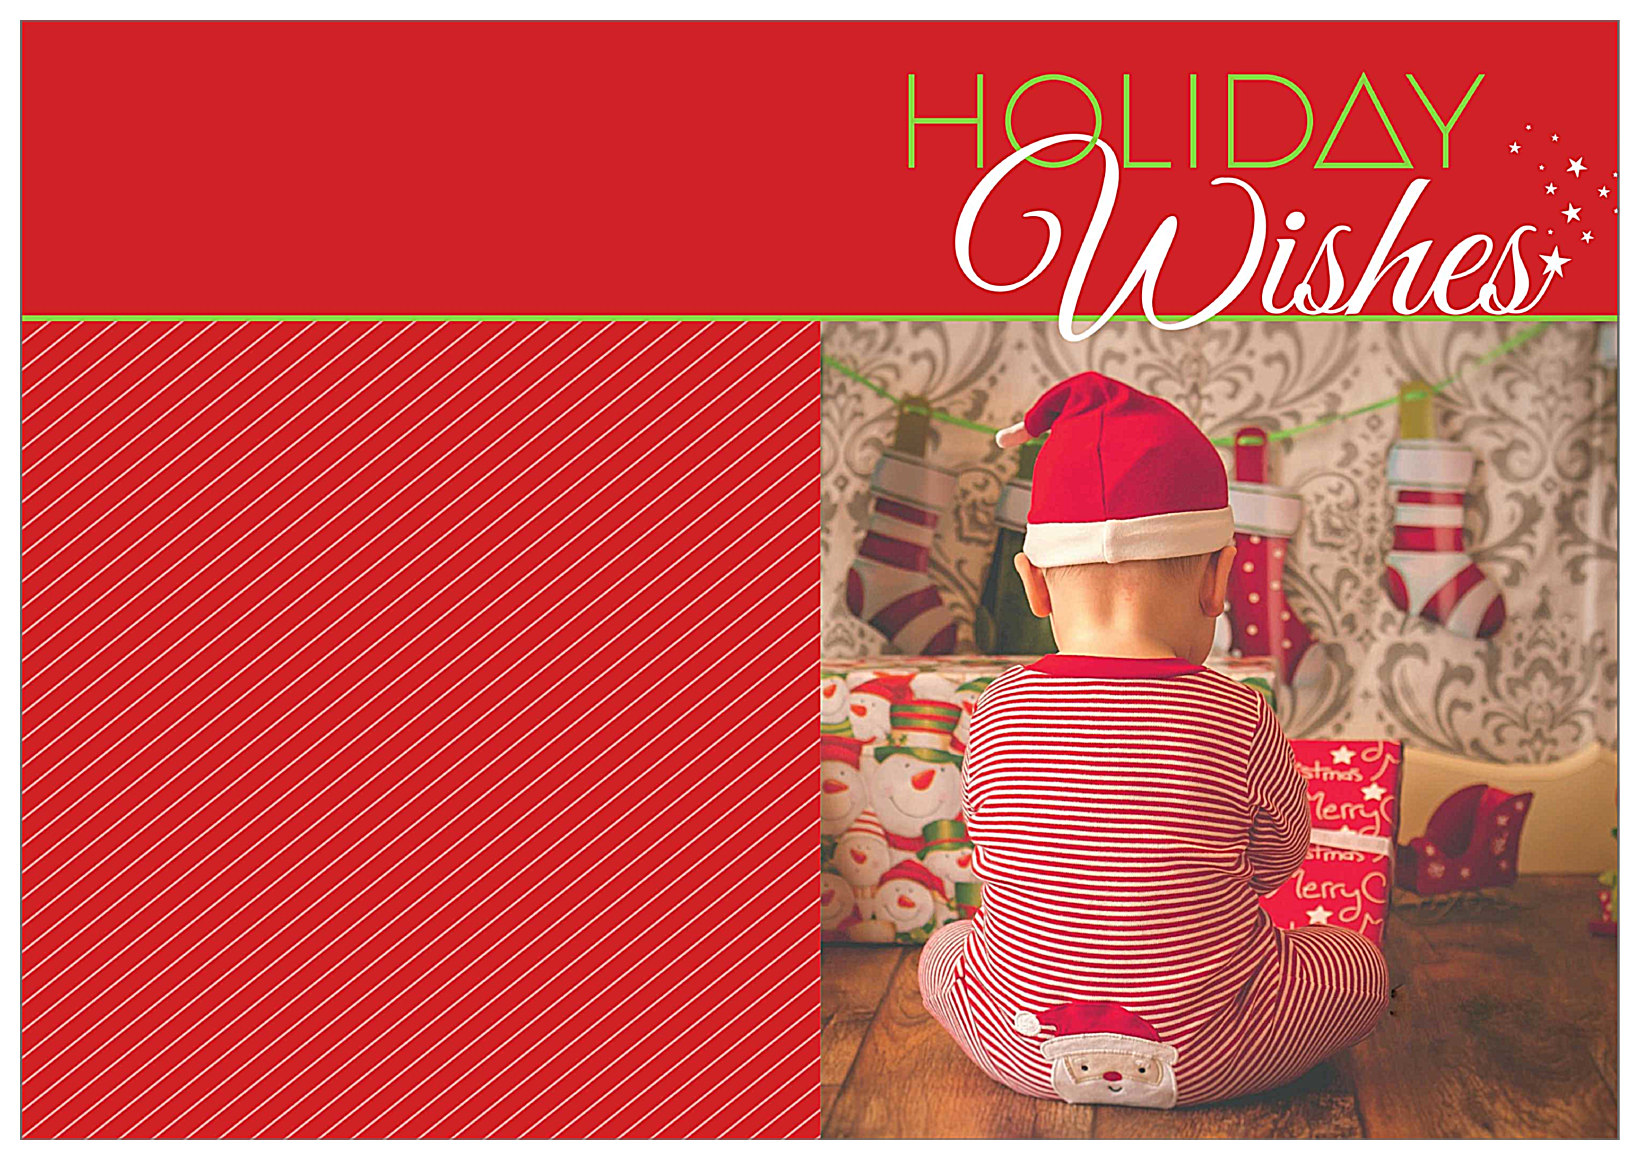 Wishing for Santa front - Greeting Cards Maker